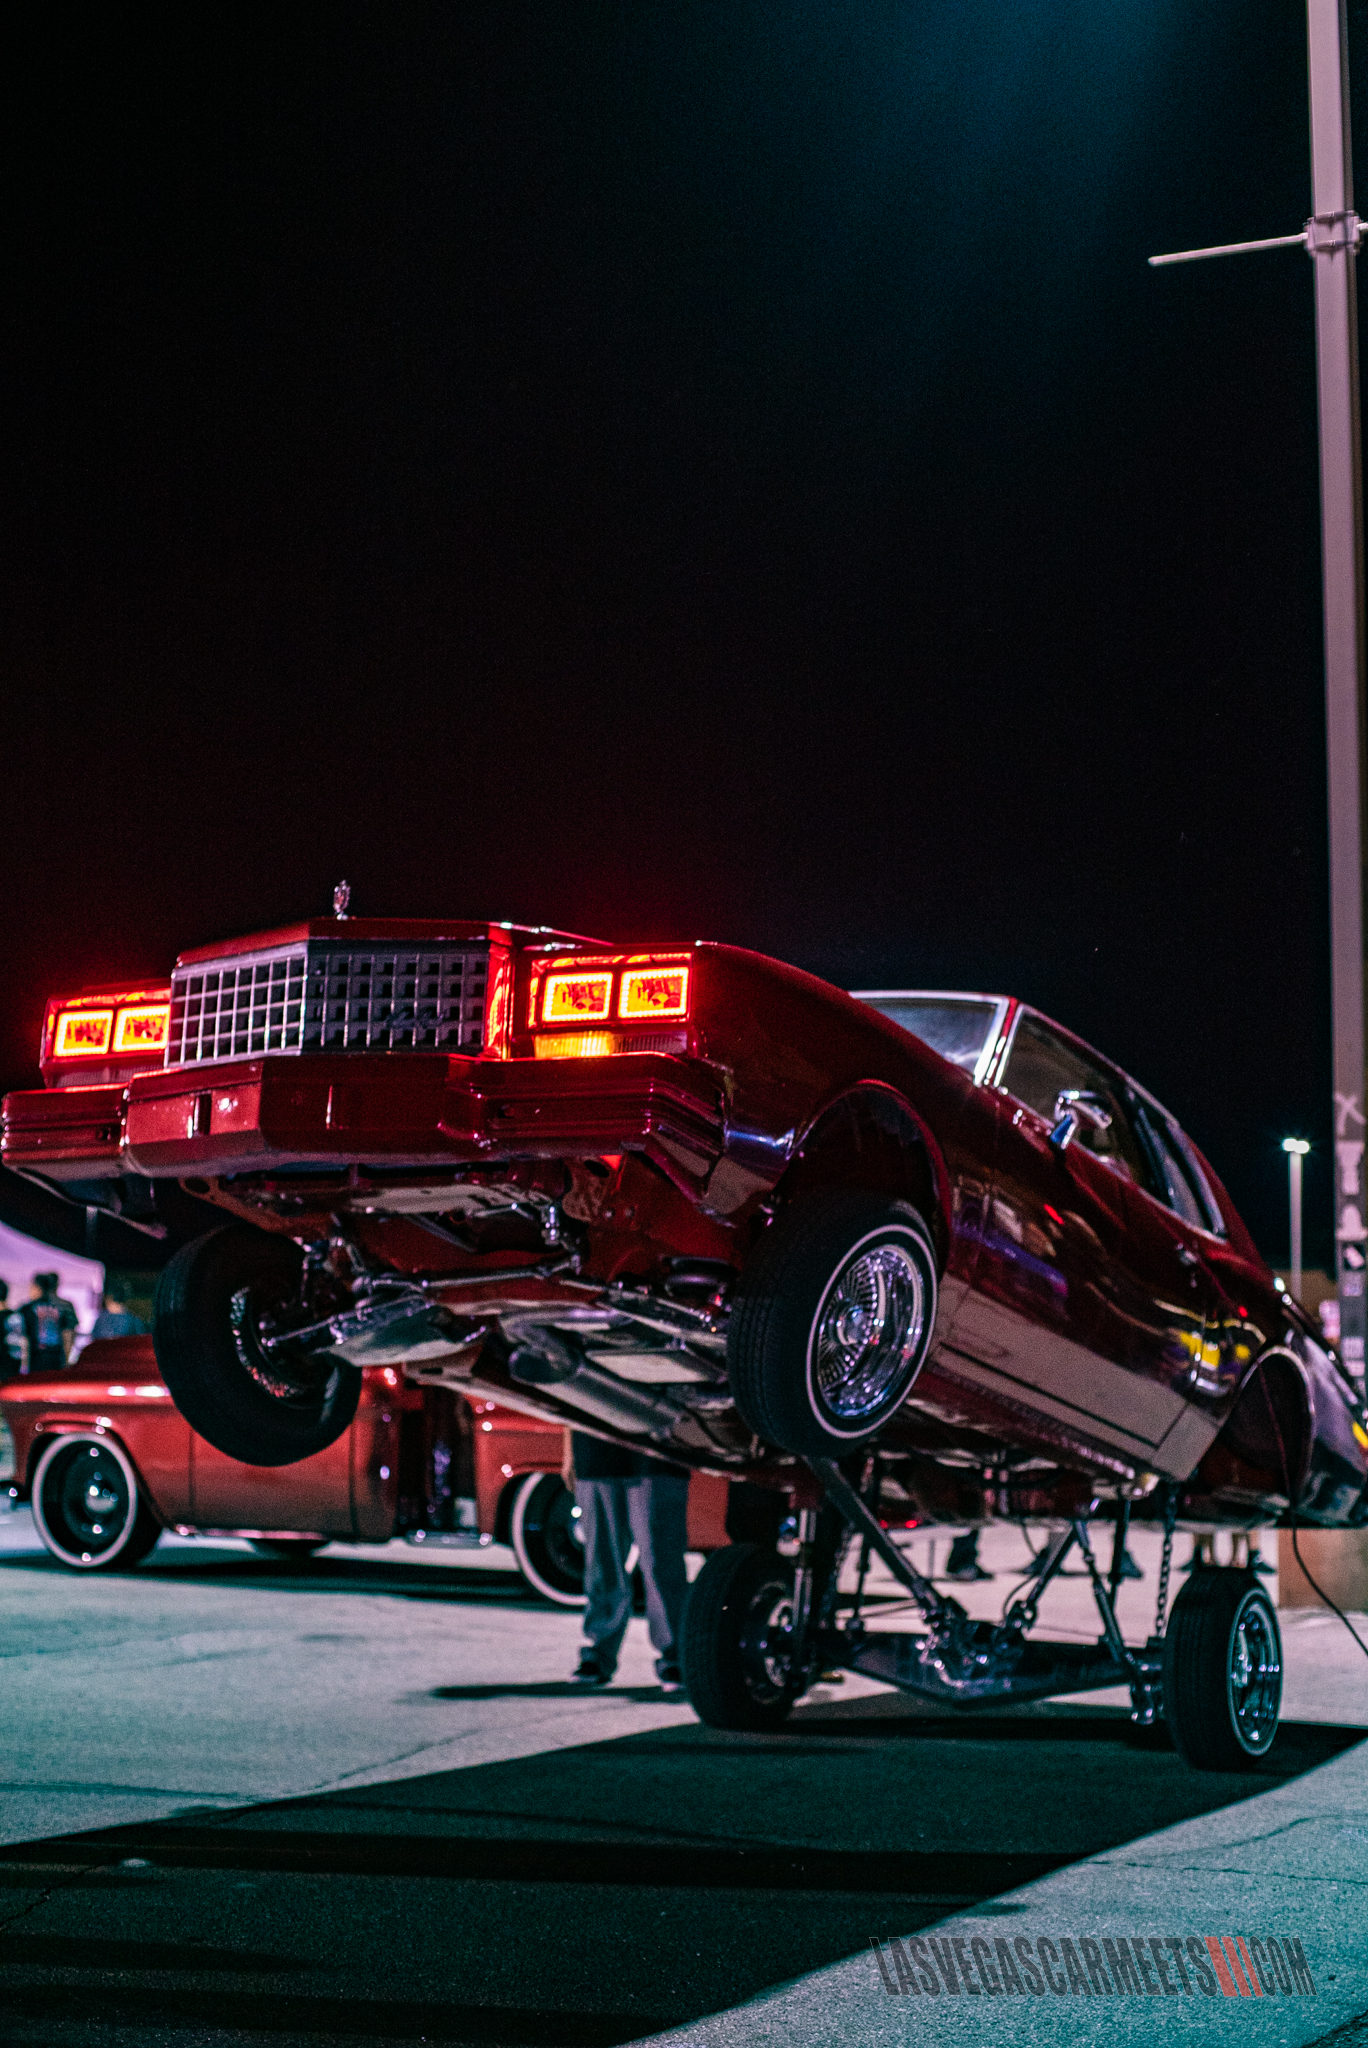 The epic block party and car meet at The Dope Exchange grand opening